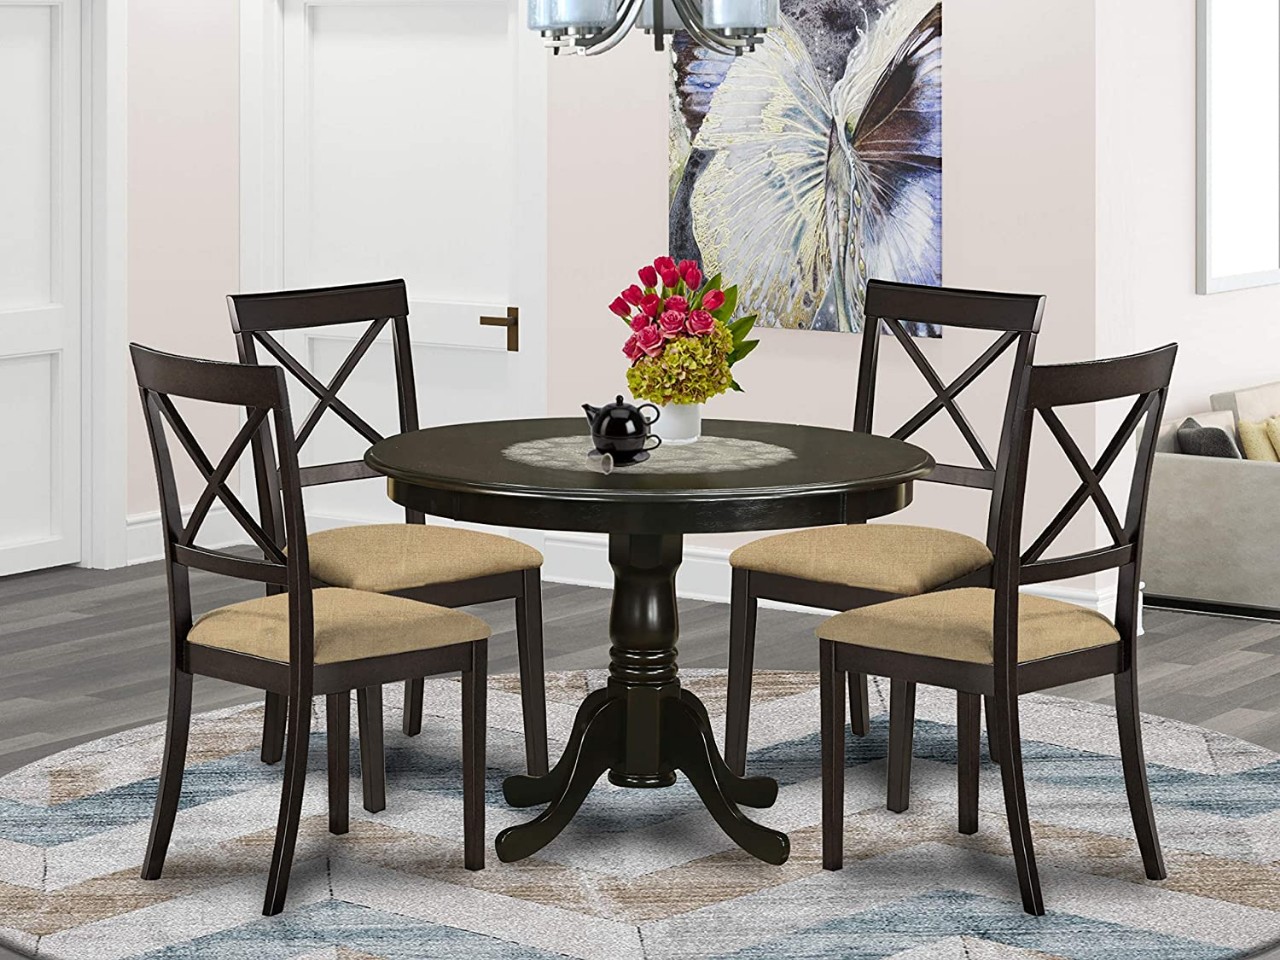 modern dining table set includes a round wooden dining table and 4 dining chairs